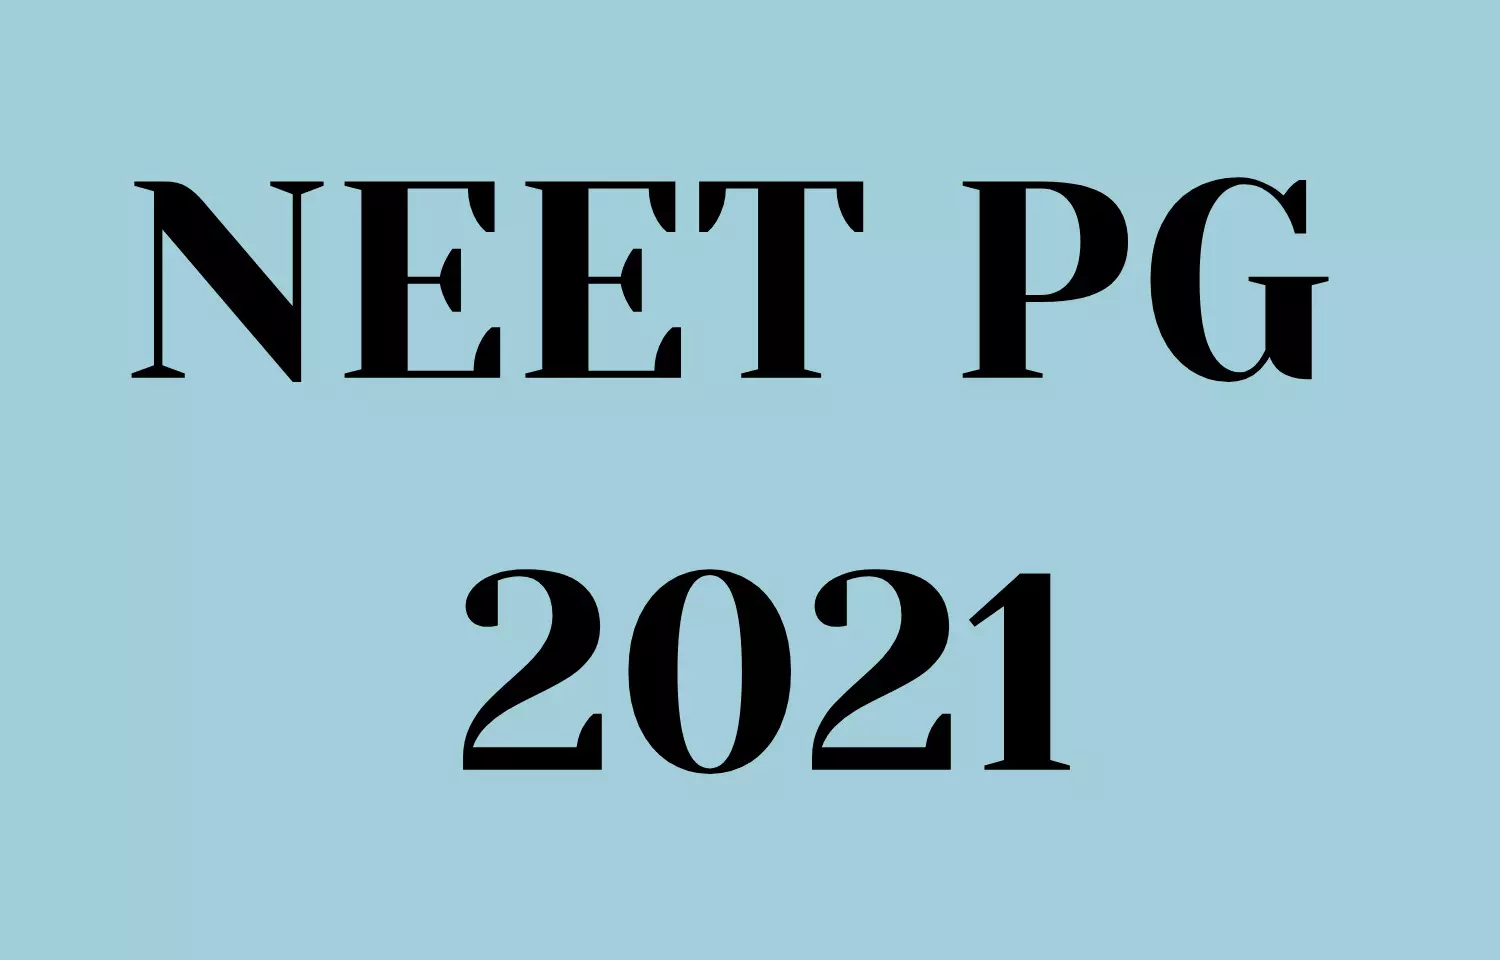 NEET PG cutoff reduced: Maha CET cell releases extended schedule for online registration of eligible candidates, Details